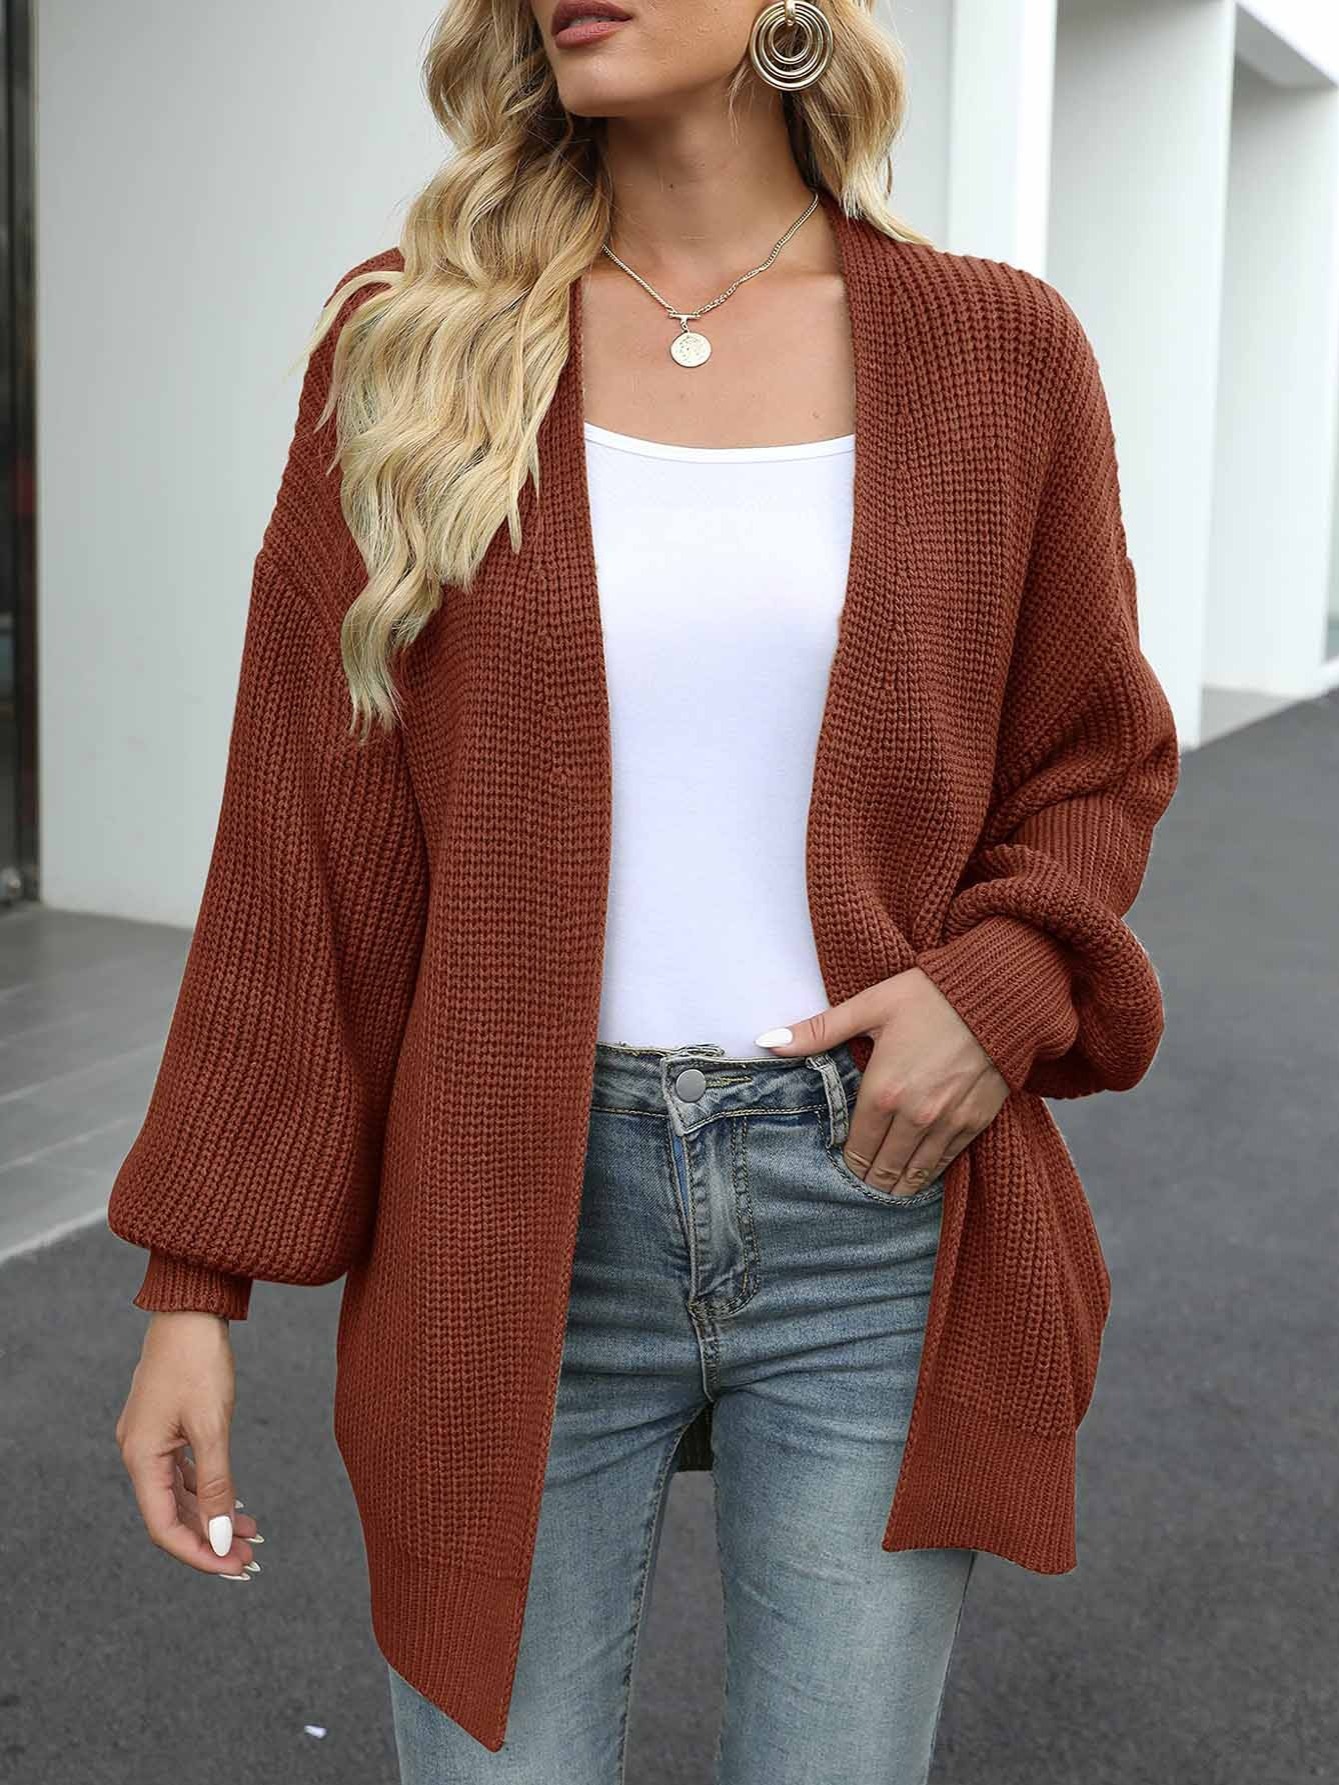 Loose Autumn Outdoor Warm Cardigans Casual